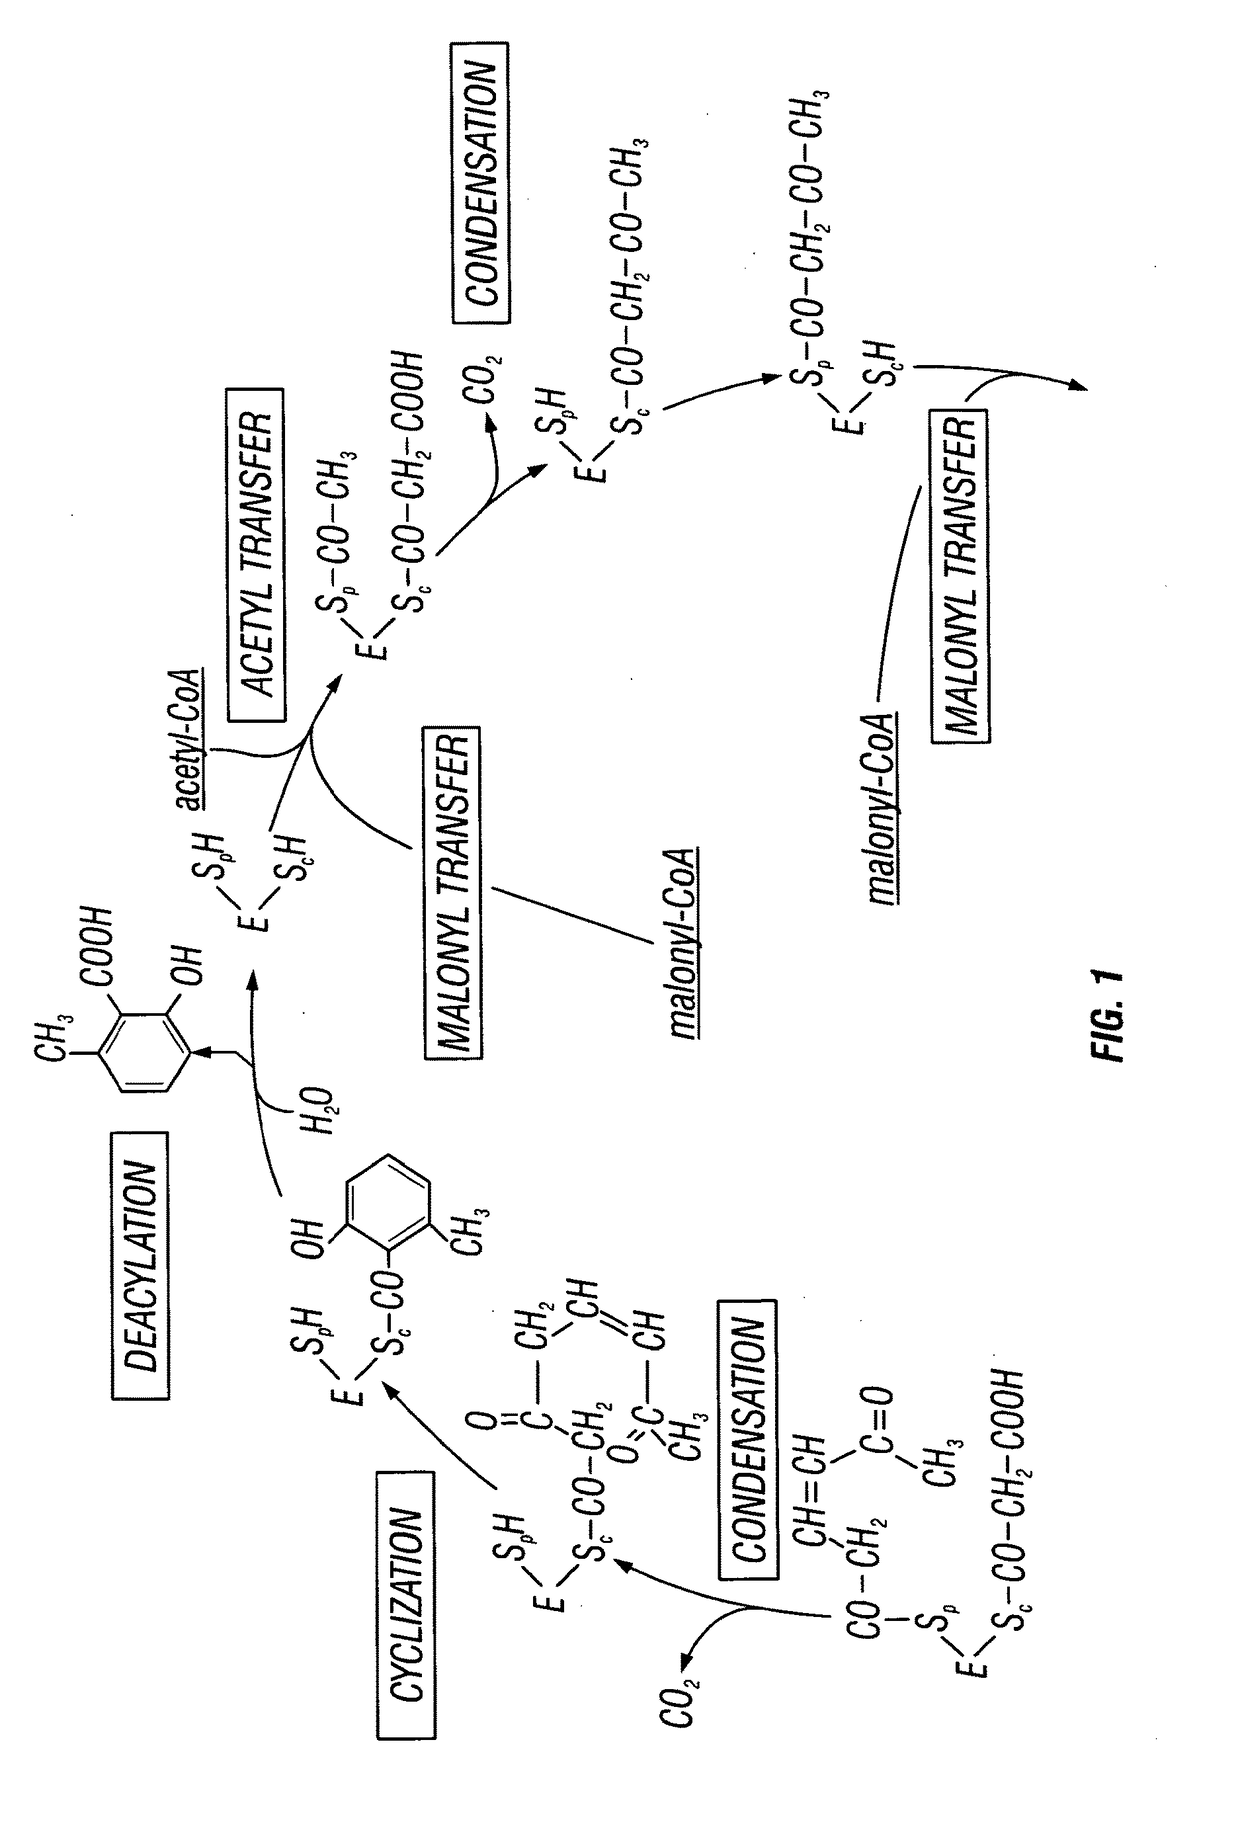 Recombinant production systems for aromatic molecules